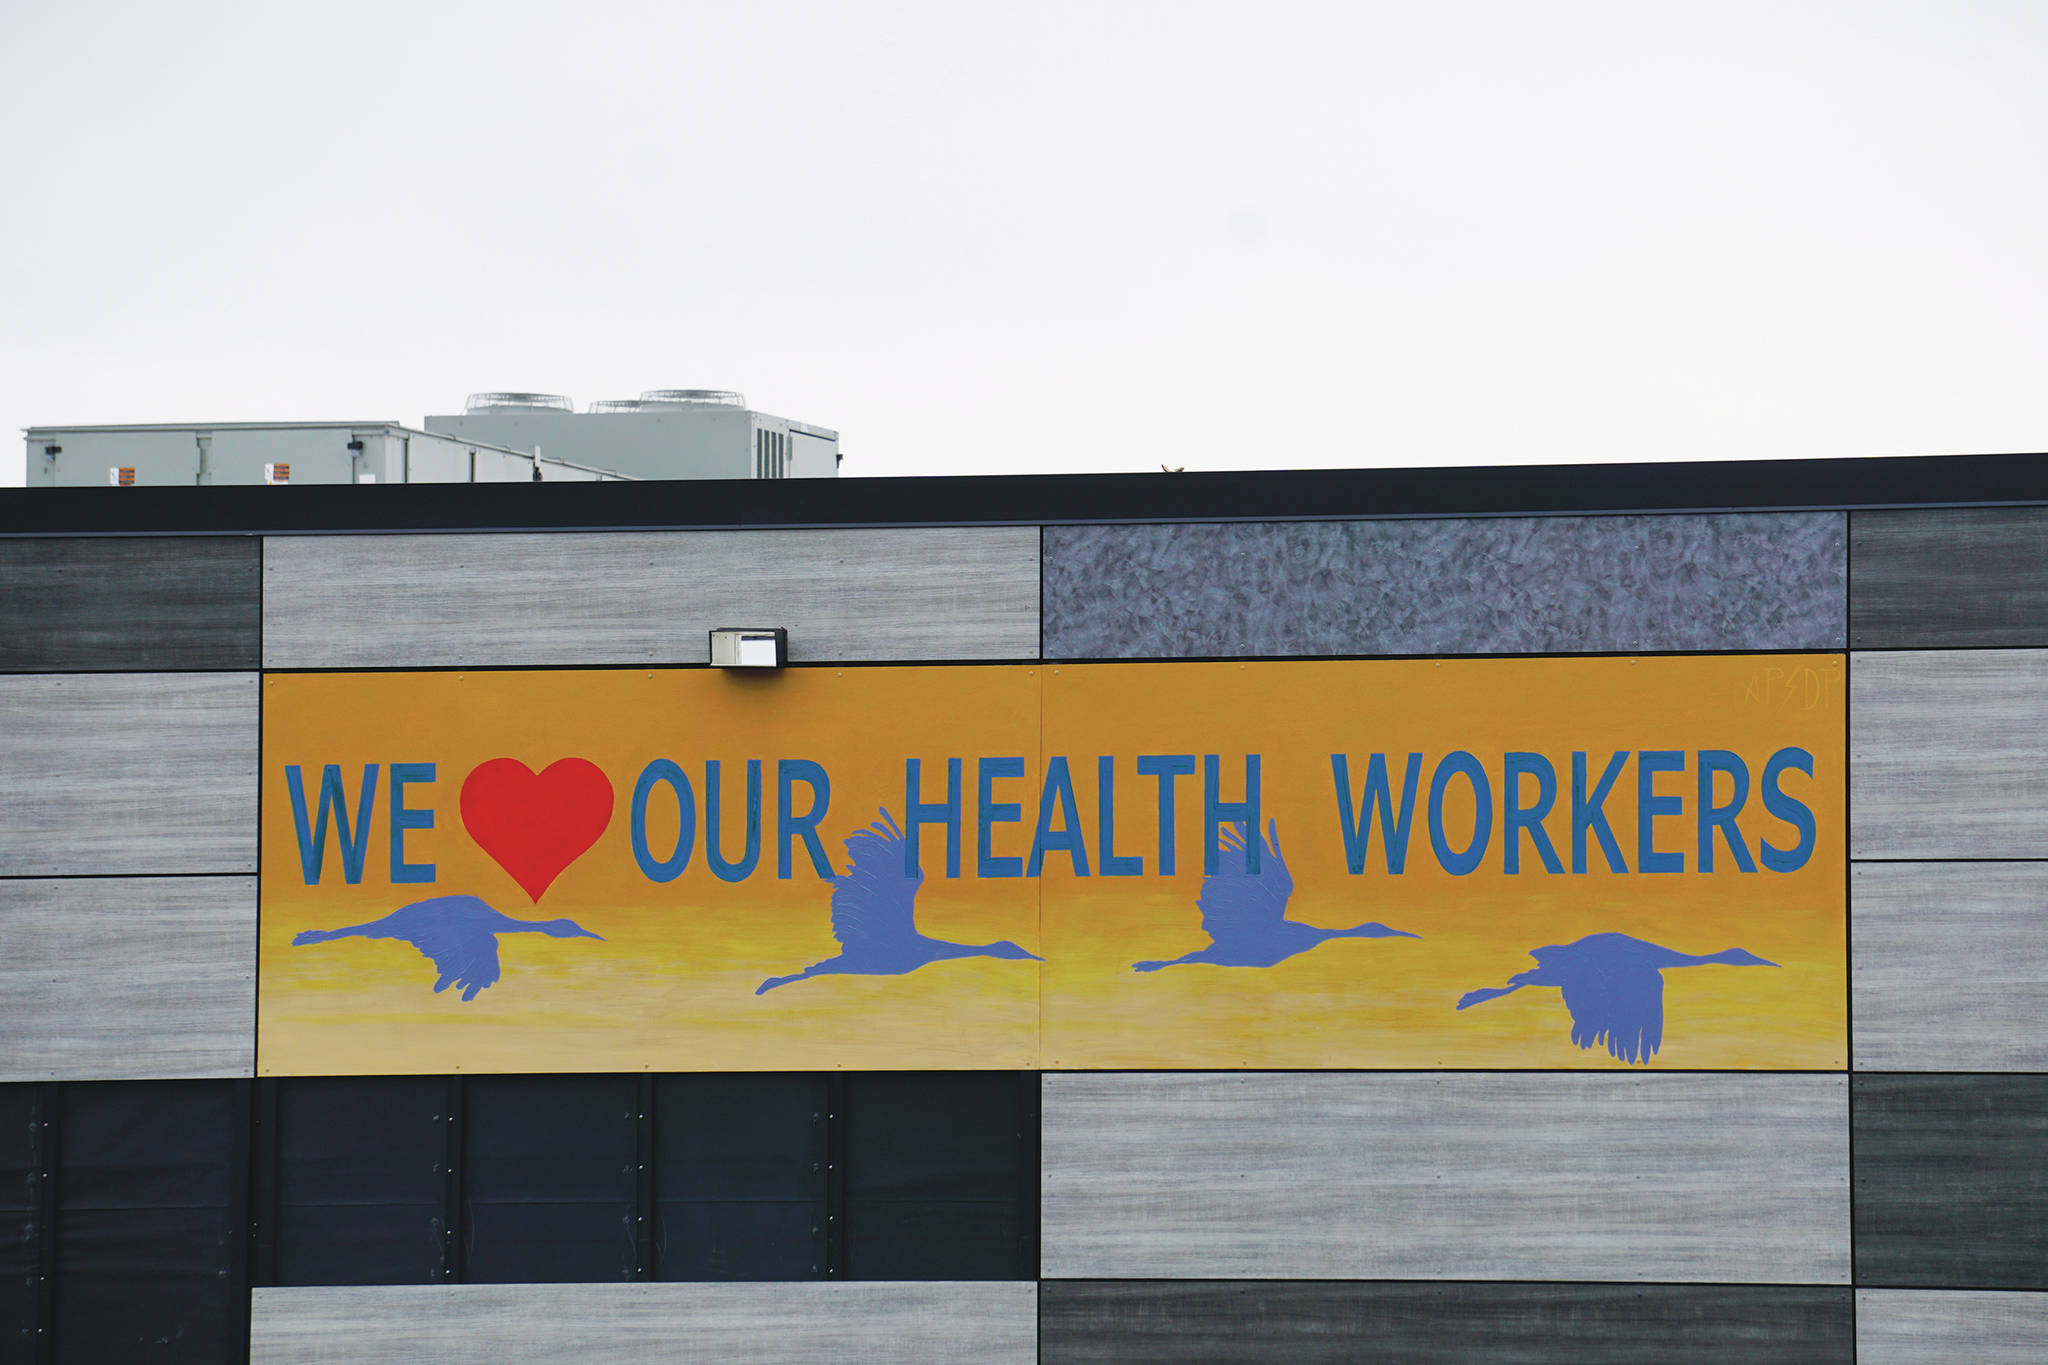 Artists David Pettibone and Austin Parkhill put up a temporary message appreciating health workers on the side of the new Homer Police Station facing Heath Street on Saturday, April 11, 2020, in Homer, Alaska. “It just seemed like a fitting thing to do, Pettibone said. “We all need these uplifting messages right now.” The artists received a 1%-for-art commission to install a larger mural featuring sandhill cranes in flight that will be installed later in May. (Photo by Michael Armstrong/Homer News)